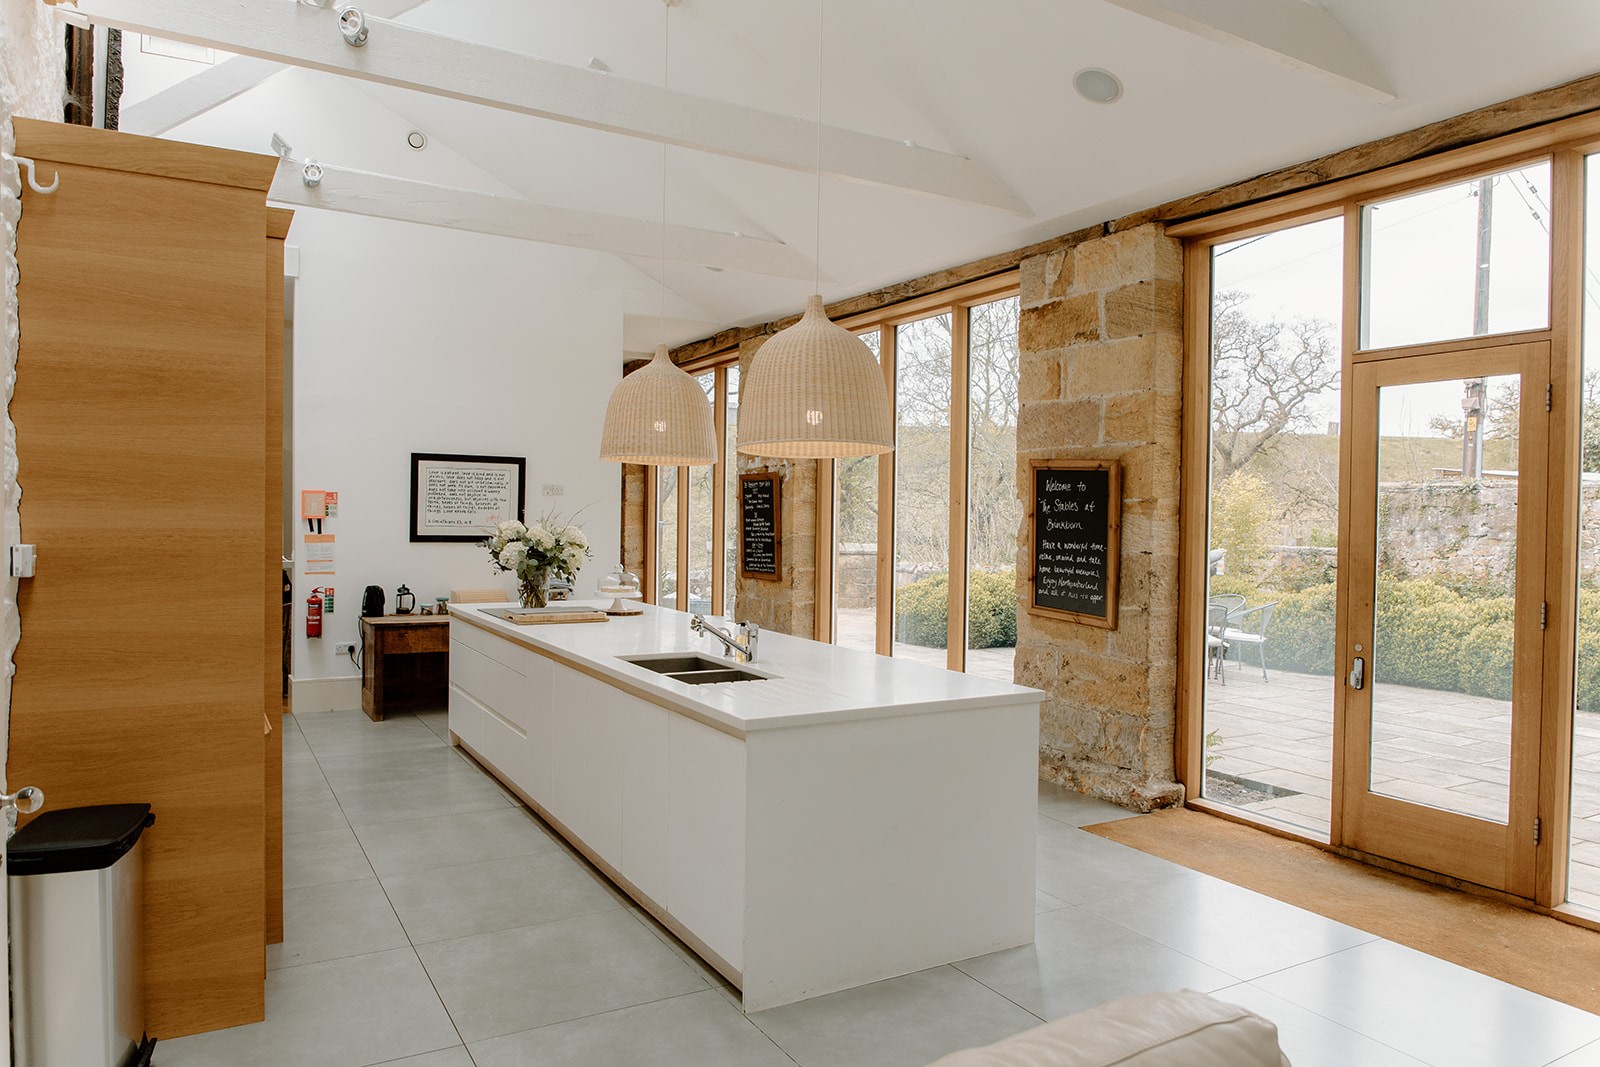 The Stables - bright and spacious kitchen (photography by Rosie Davidson)